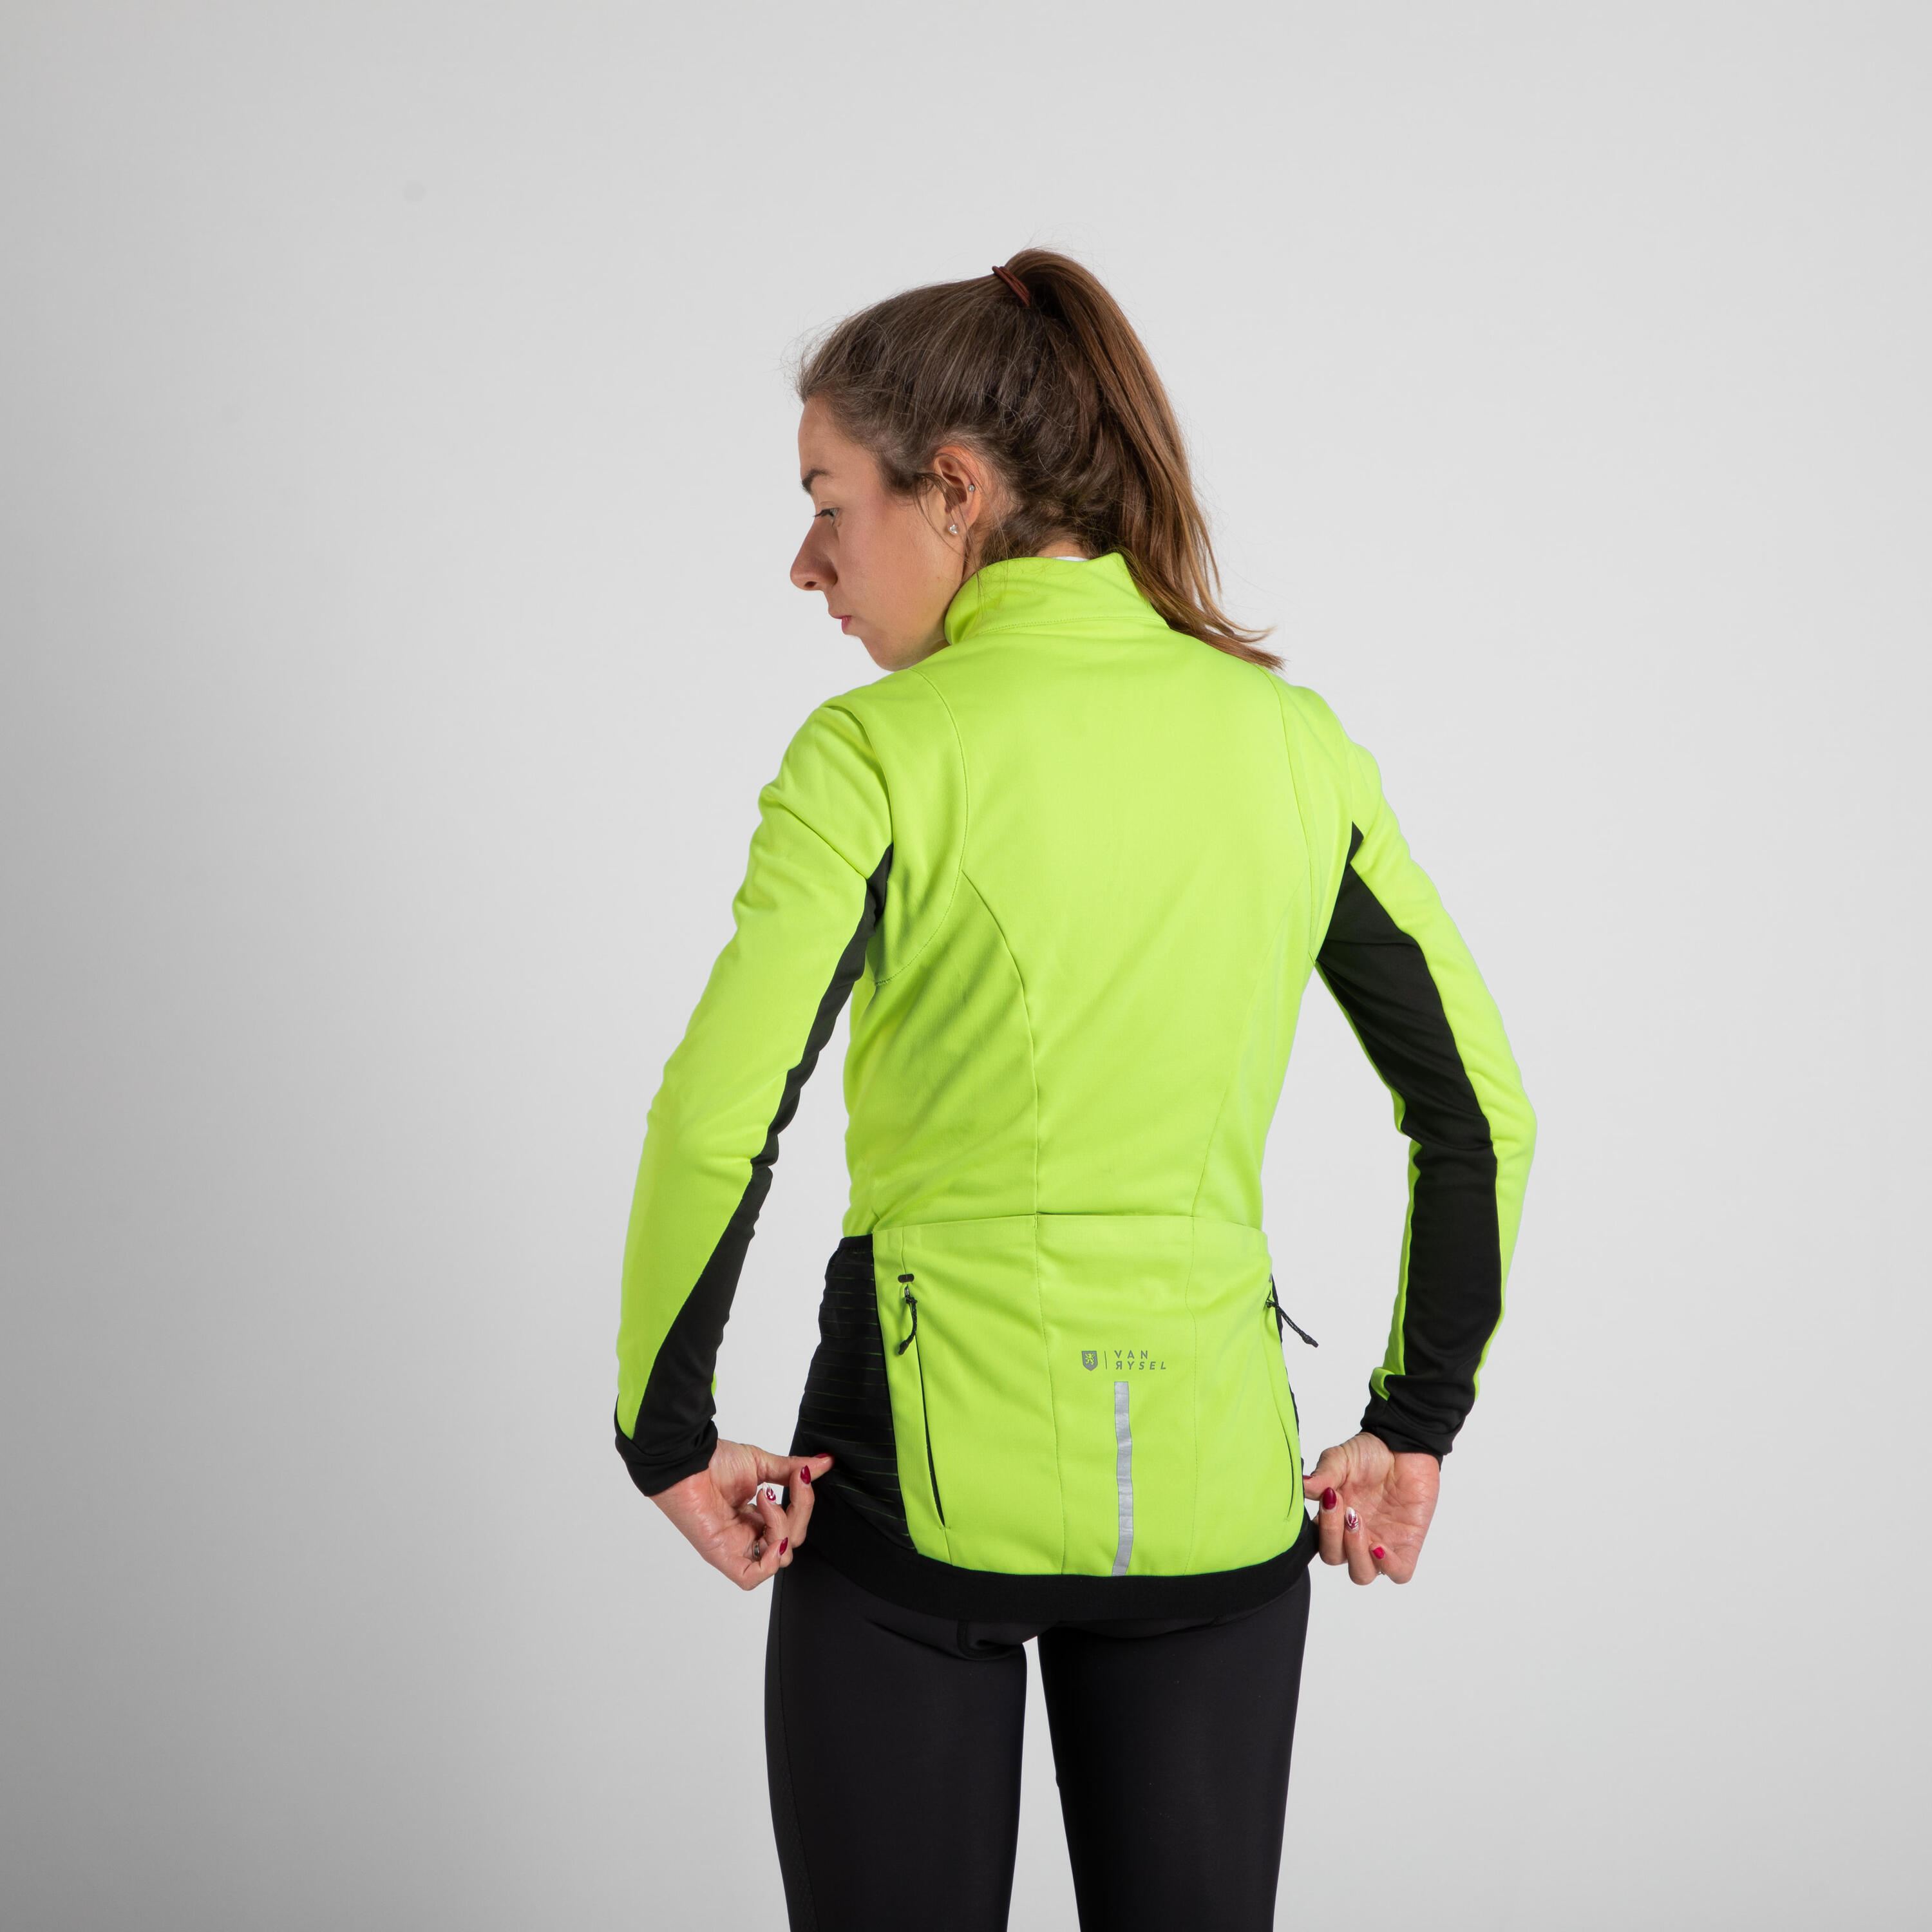 Women's Sportive Cold Weather Jacket - Yellow 5/7